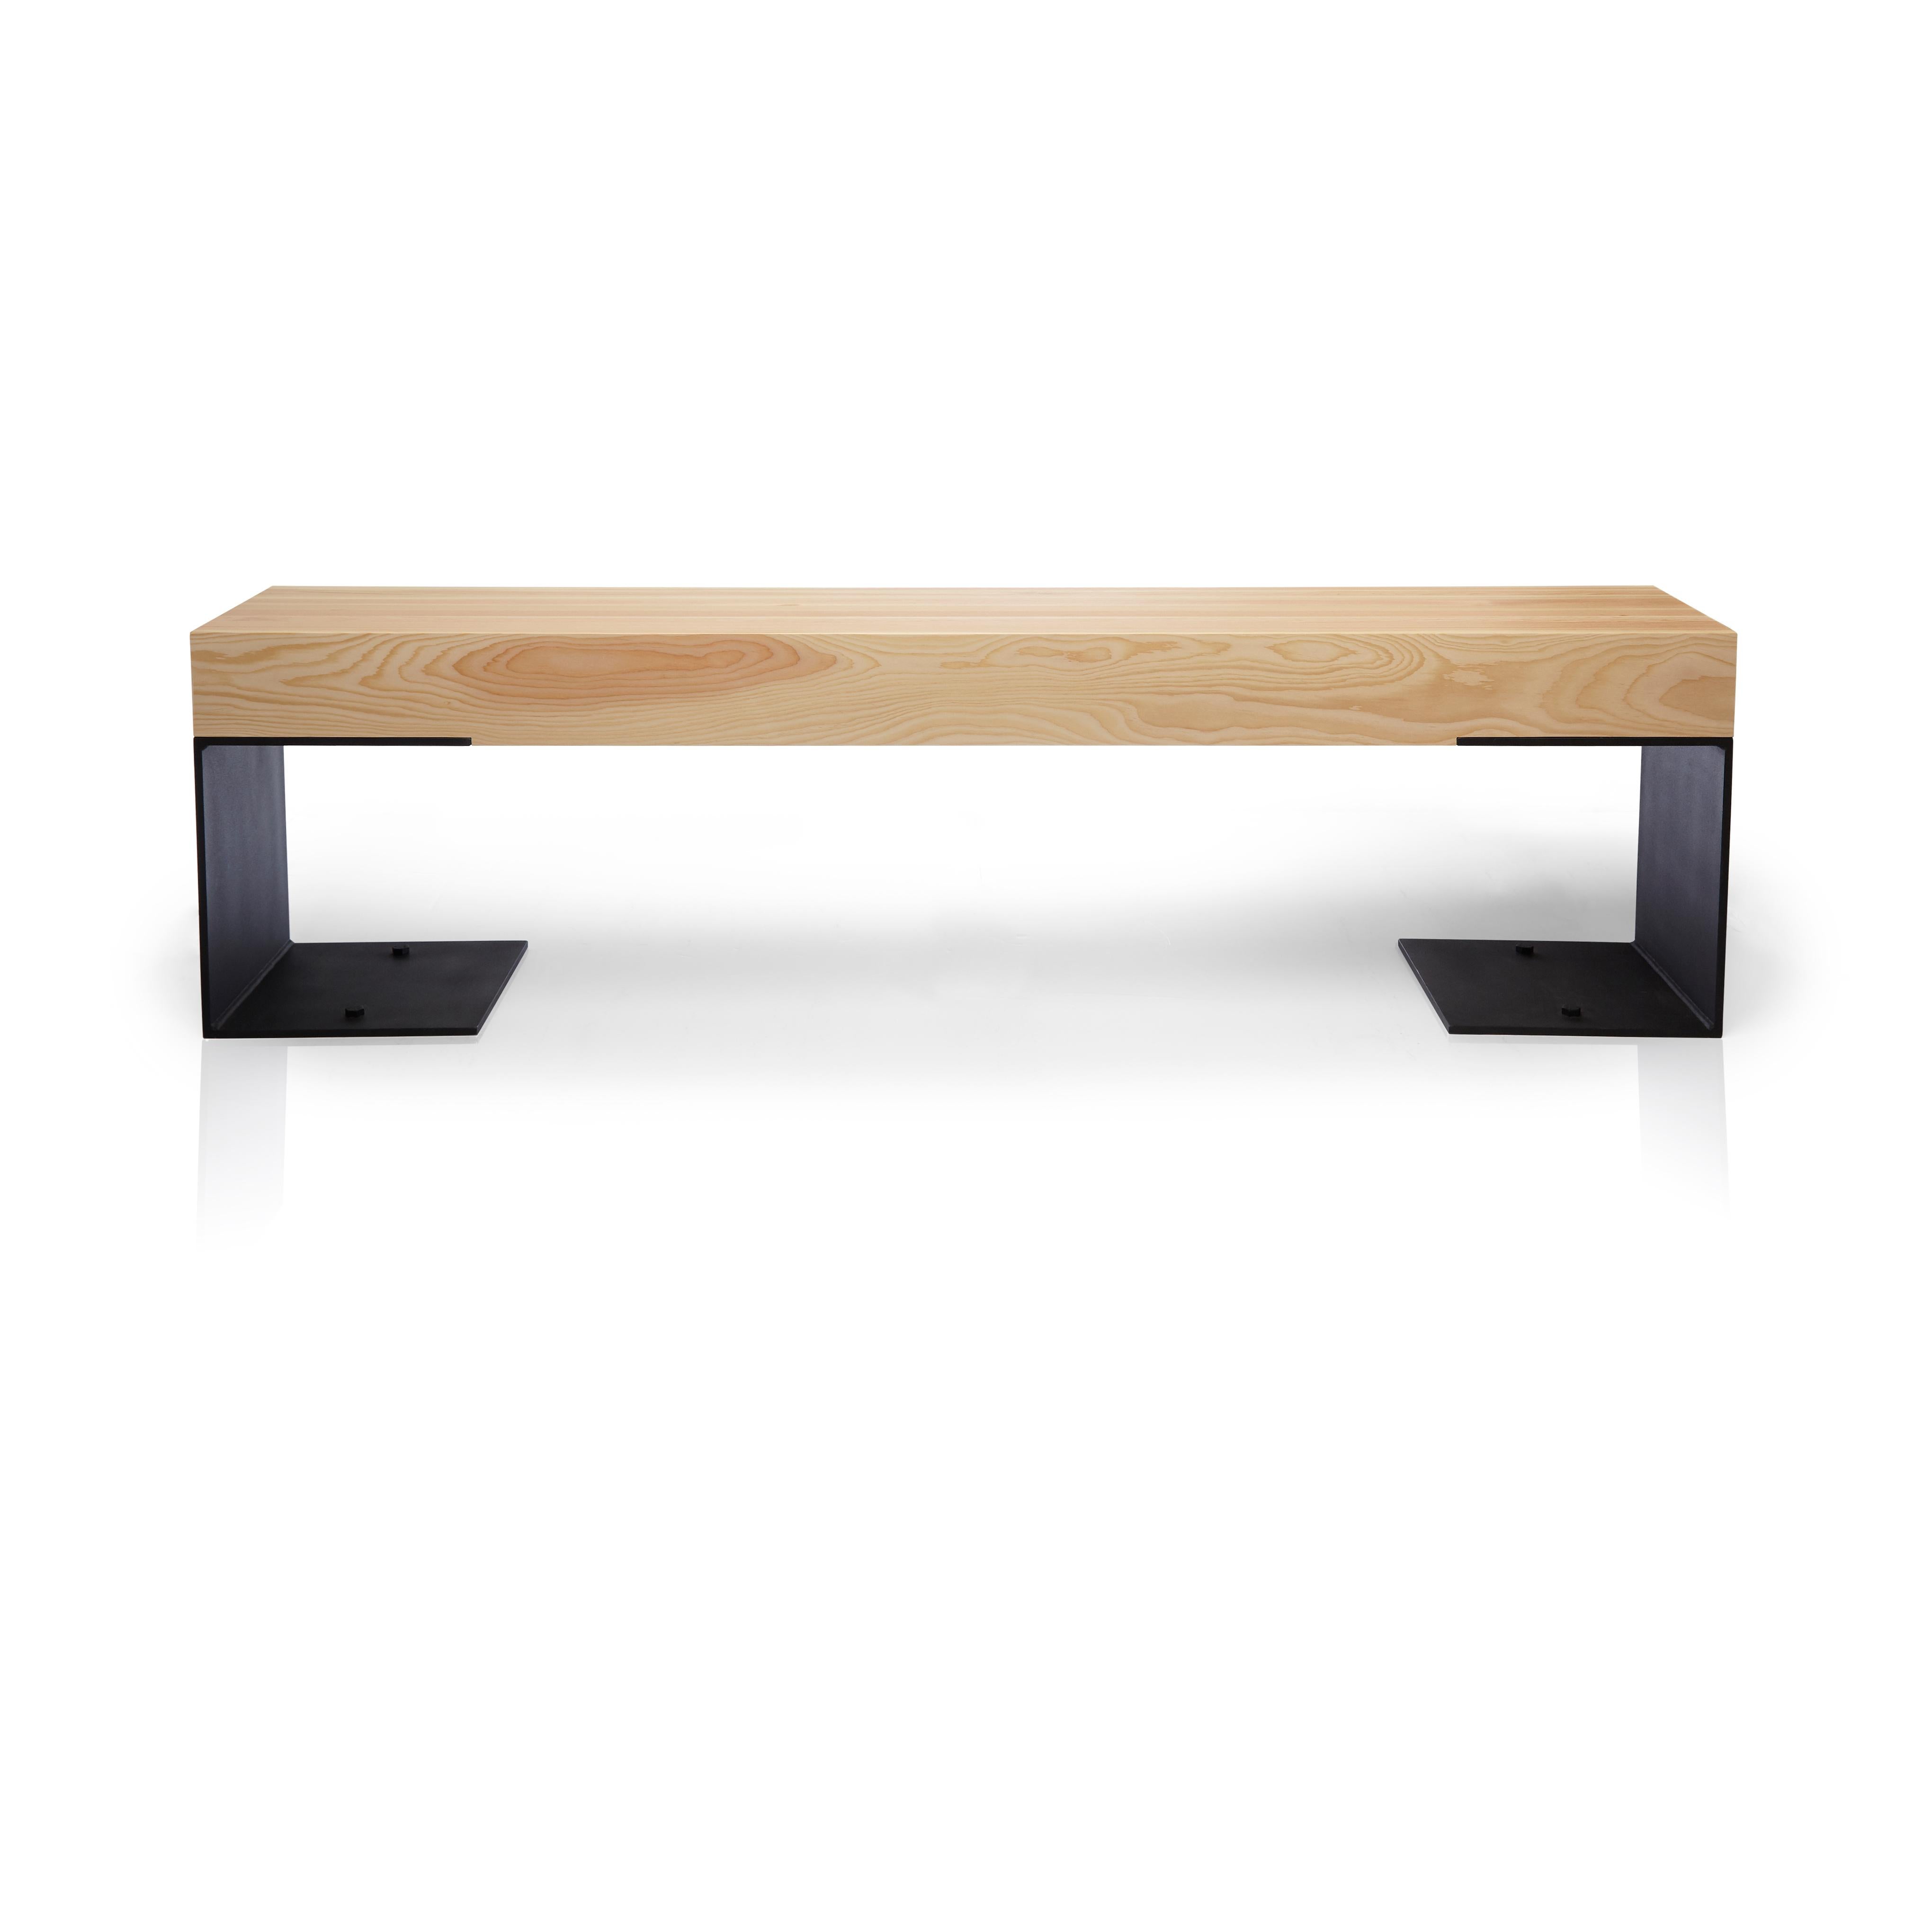 Modern industrial. The Kai Hallway bench is all about proportions, balancing the width of the steel legs and the thickness of the bench seat. It provides a modern industrial look using Douglas Fir lamination's set on black steel legs. Designed by